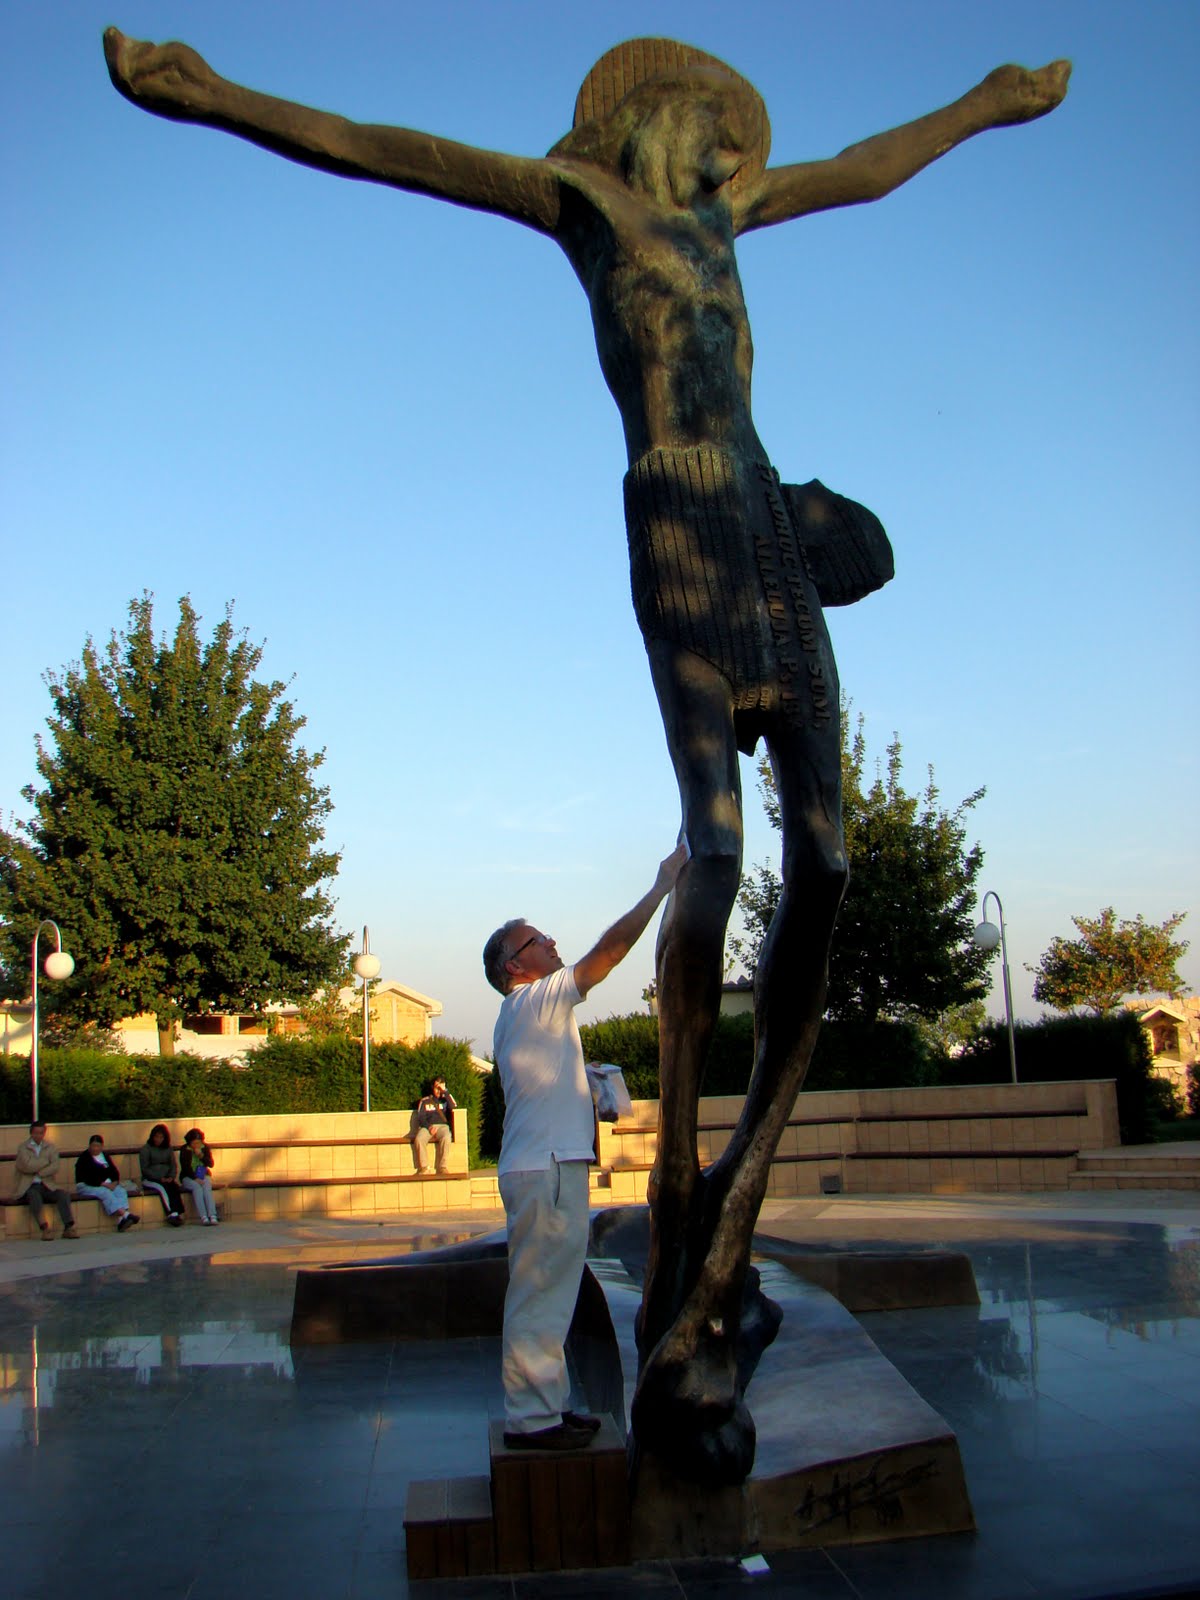 Collecting fluid from the "weeping knee" of the Risen Christ statue, Medugorje, Hercegovina